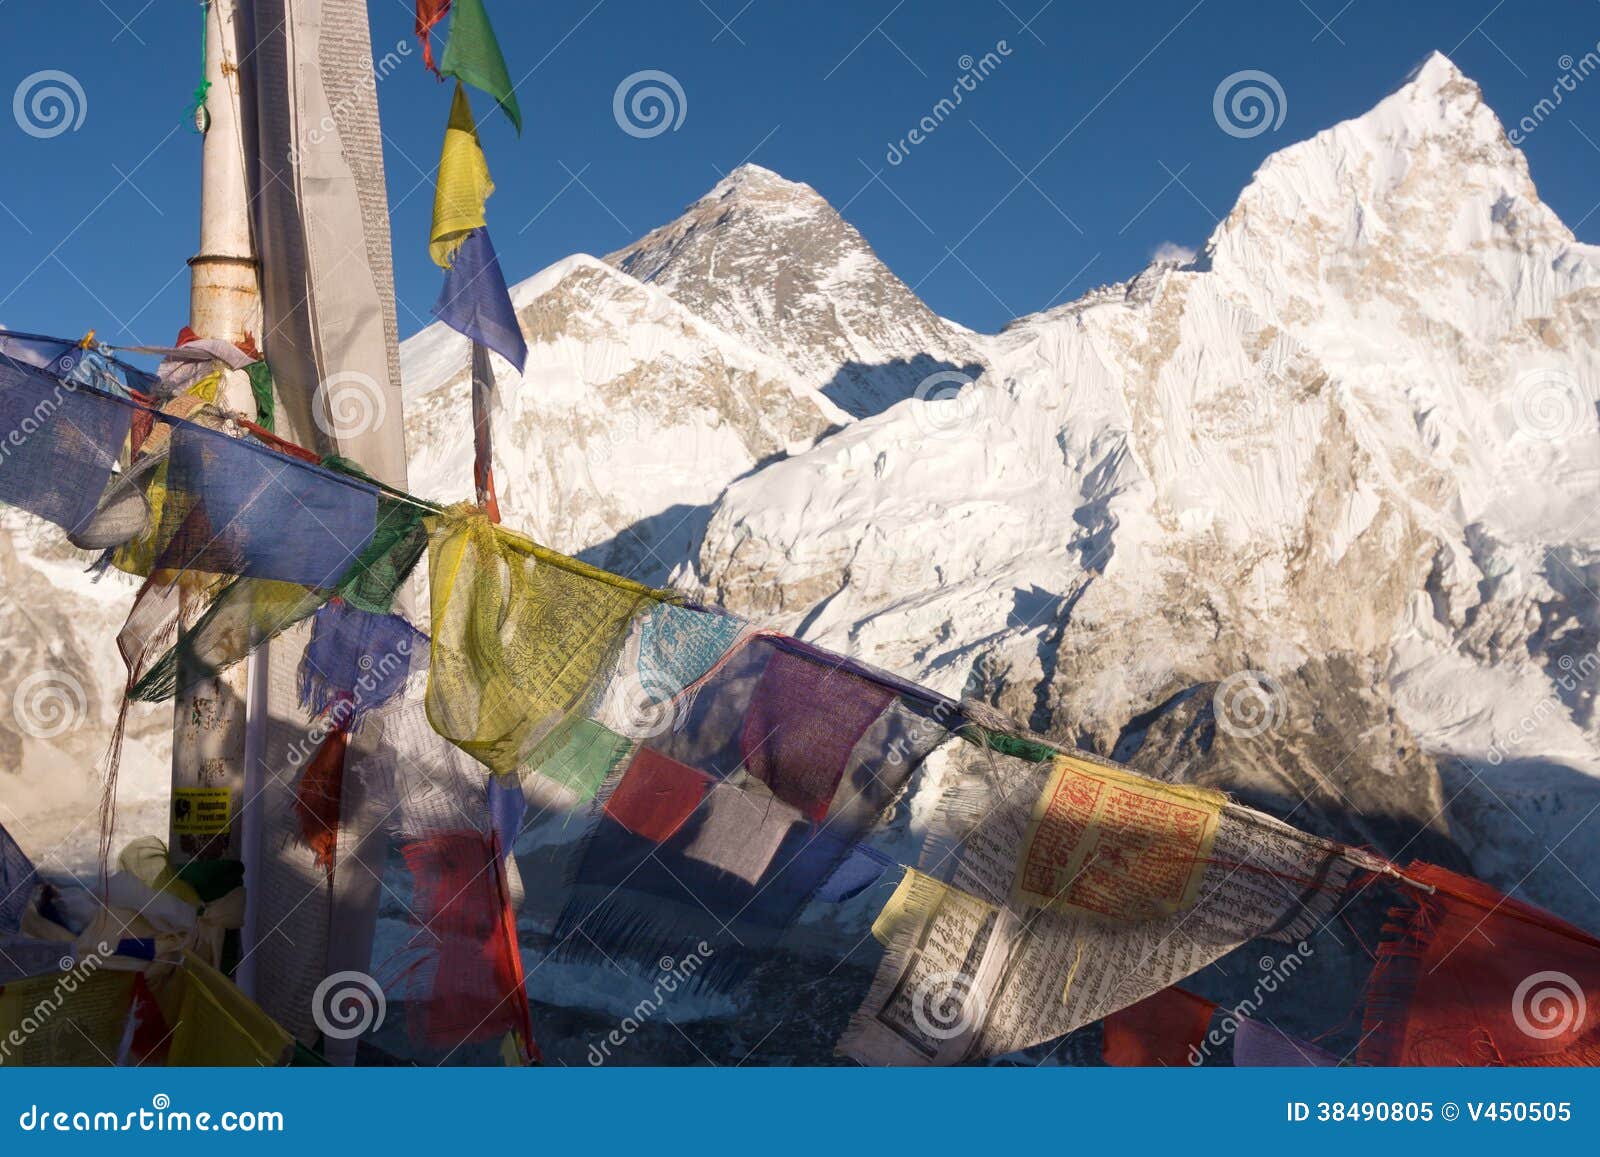 everest and nuptse from kala patthar